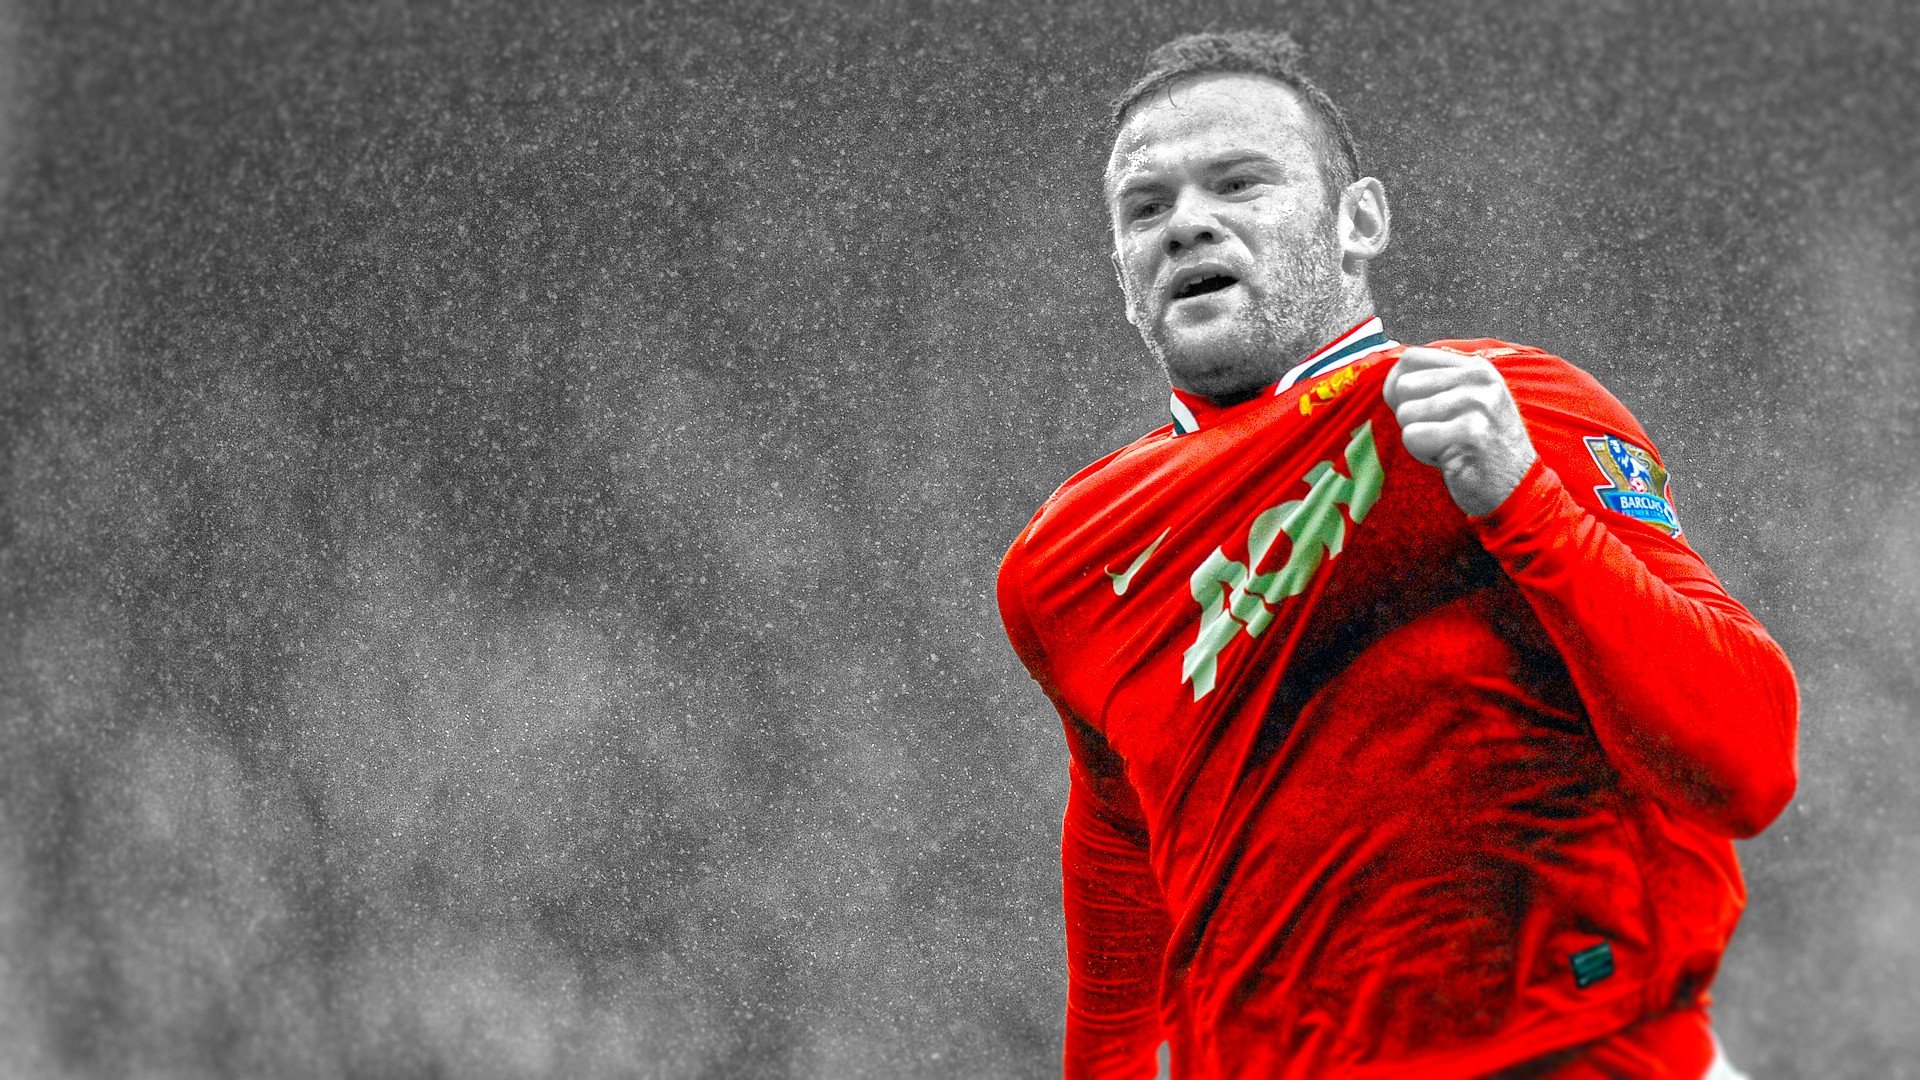 Wayne Rooney hd picture snowy background 1920x1080